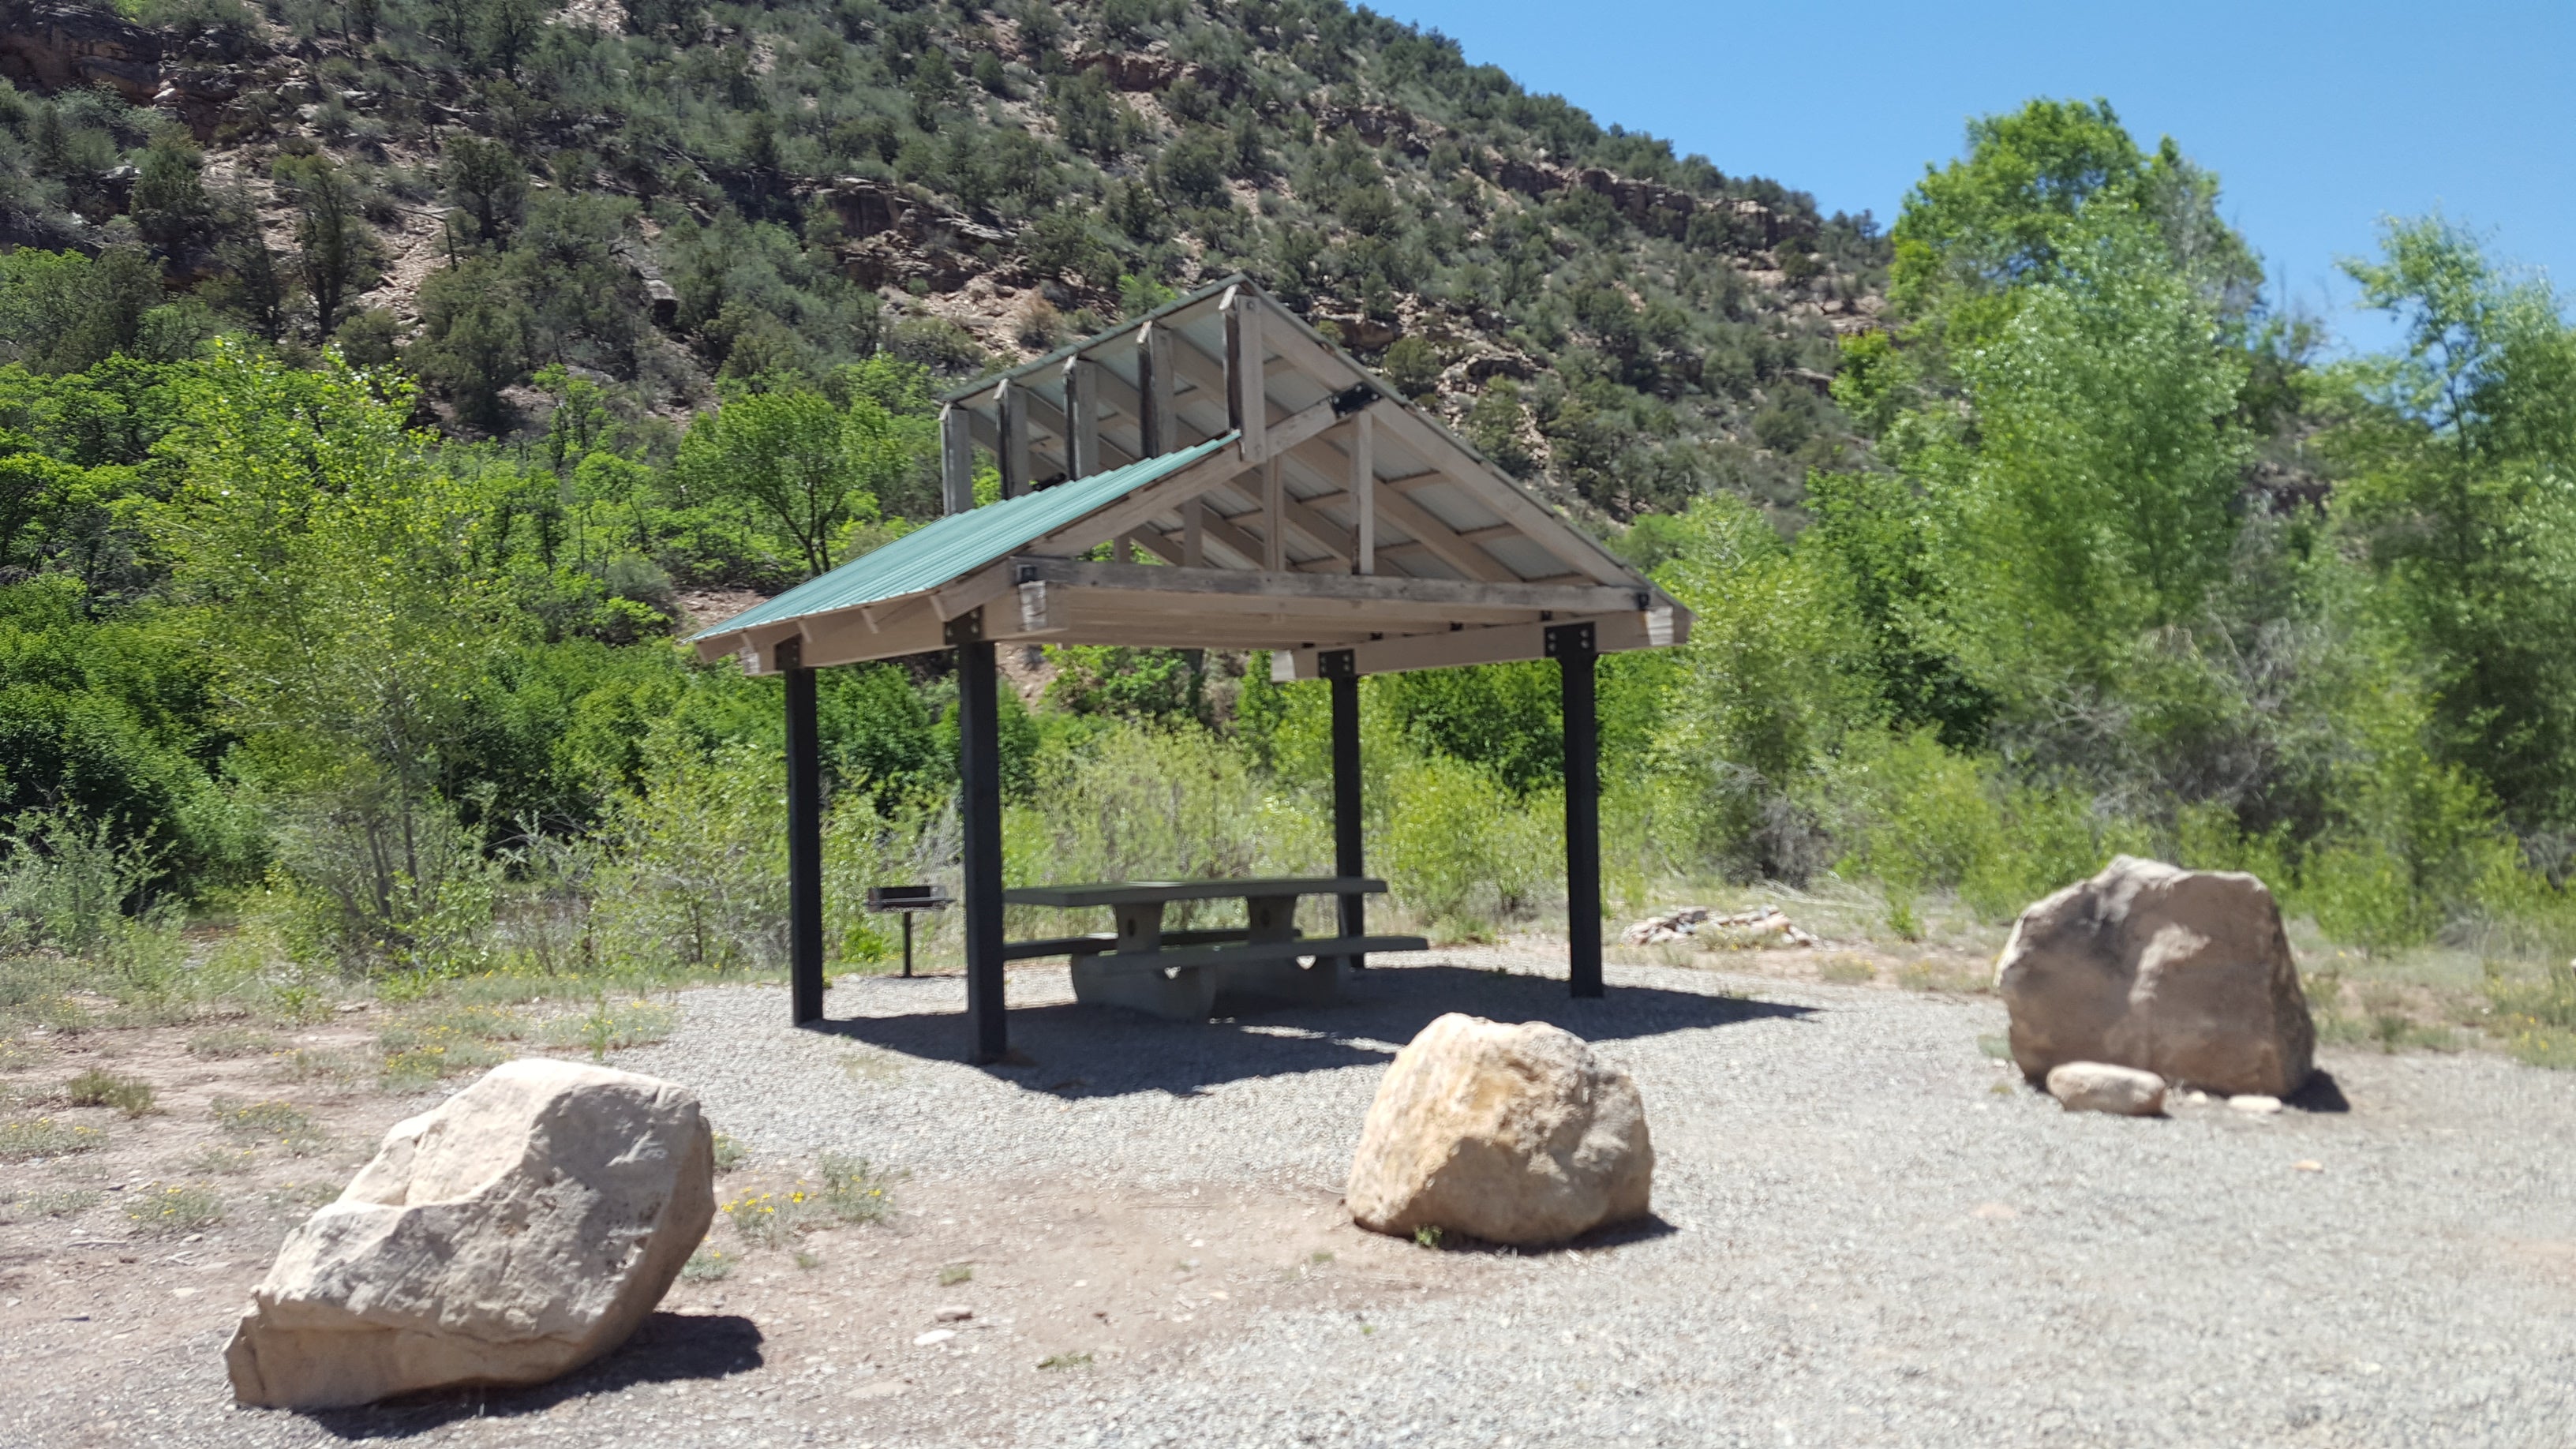 Camper submitted image from Ledges Cottonwood Campground - 2